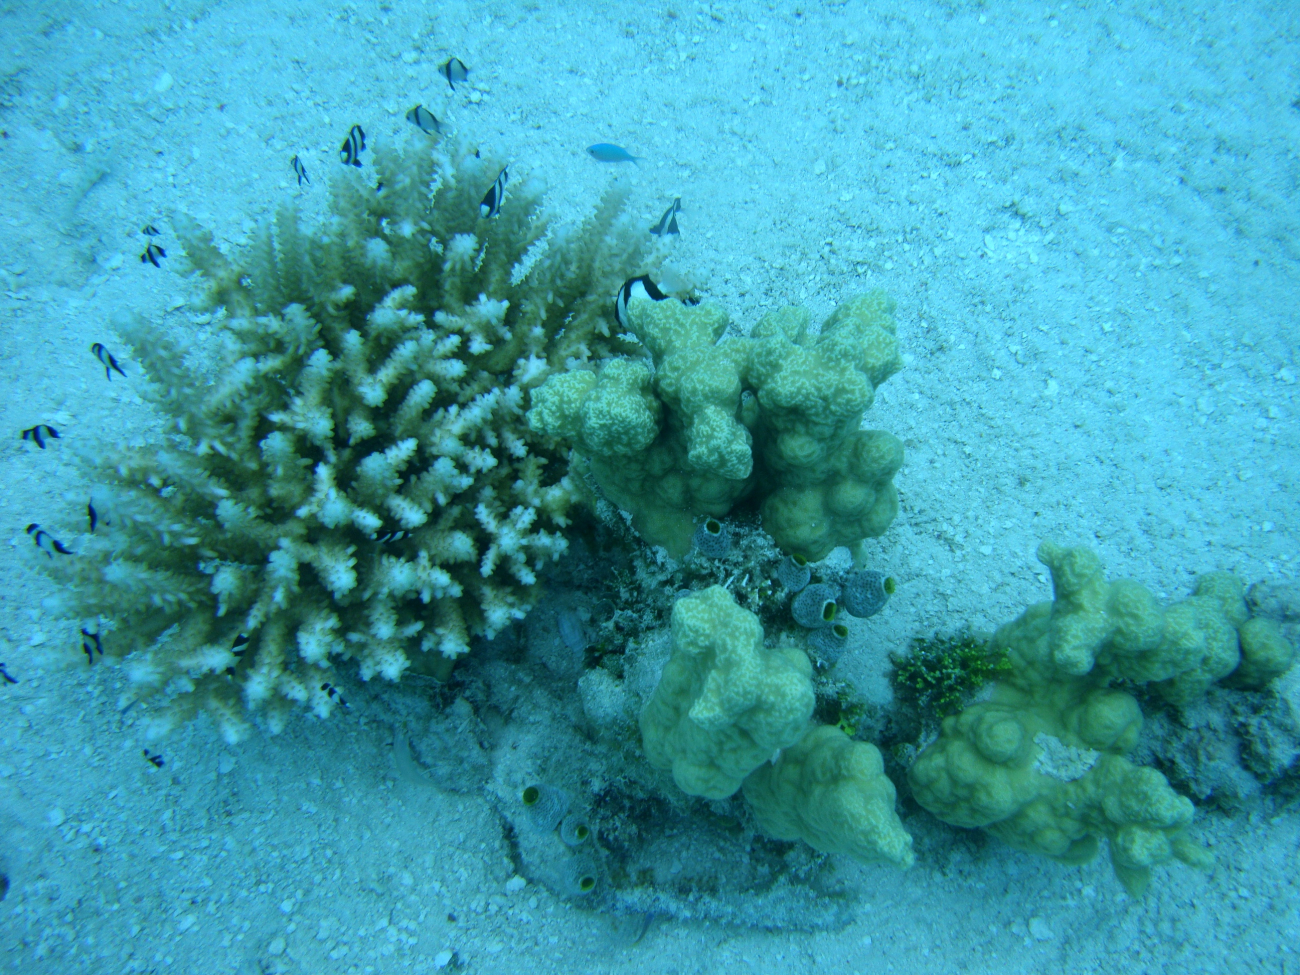 Two species of coral with Acropora sp